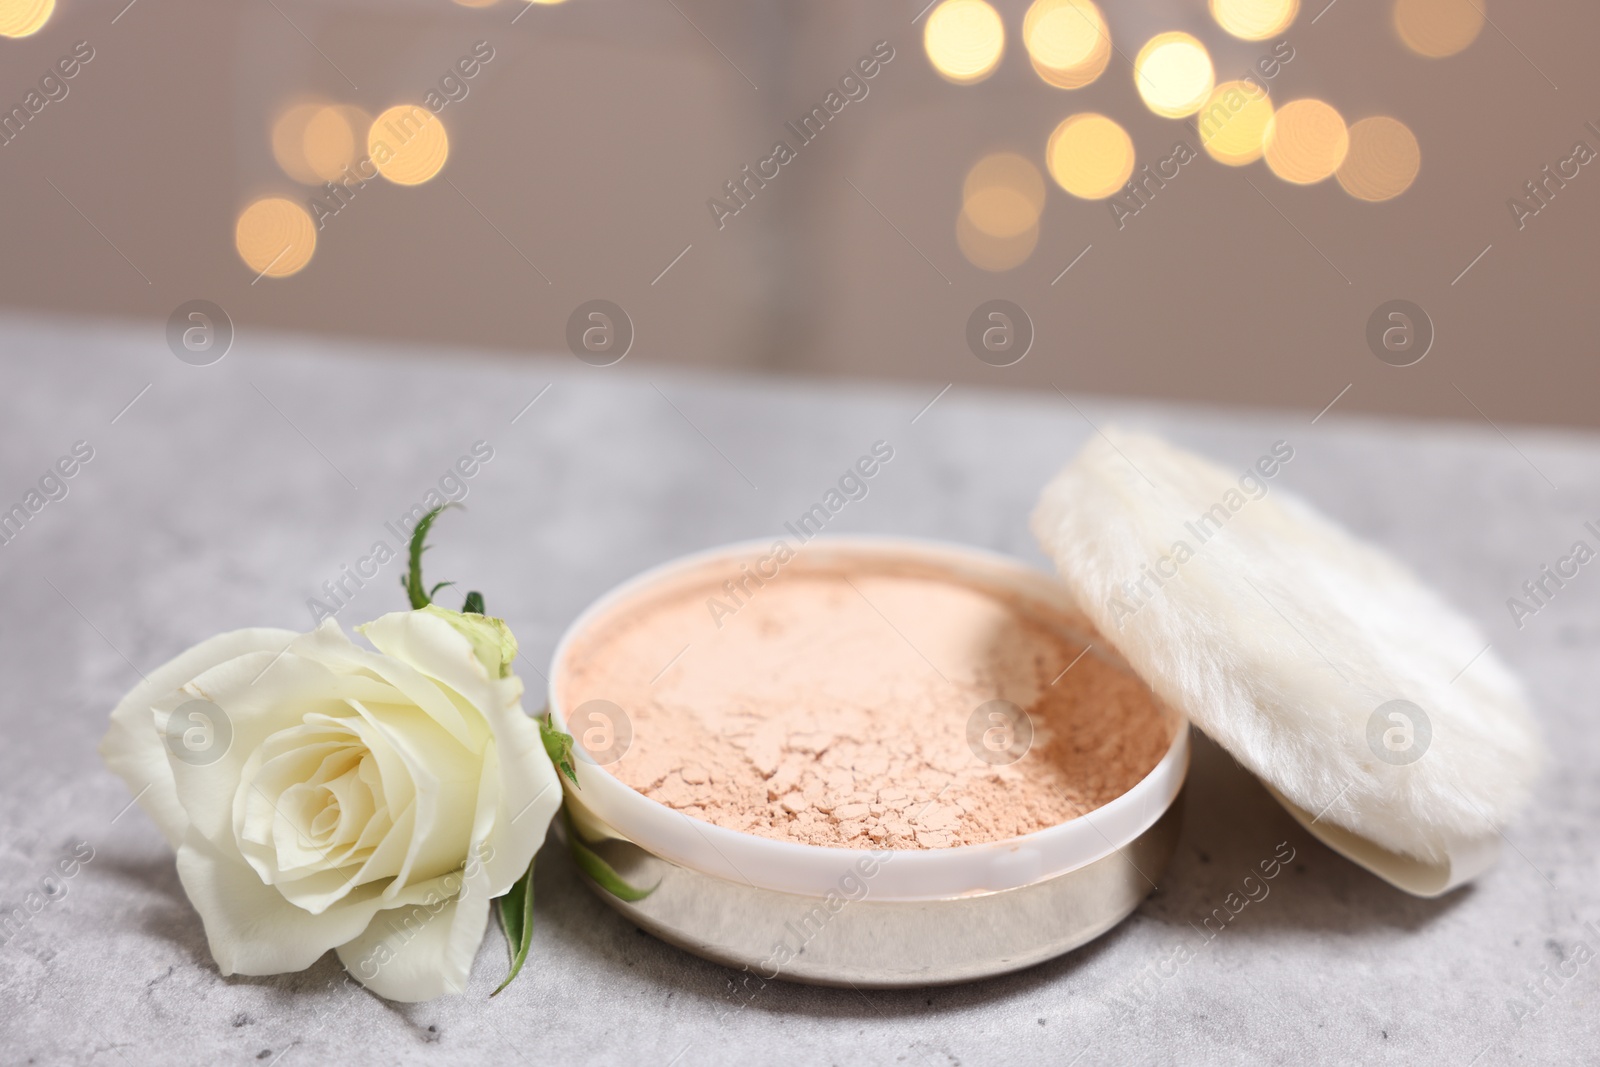 Photo of Face powder, puff applicator and rose flower on grey textured table against blurred lights, closeup